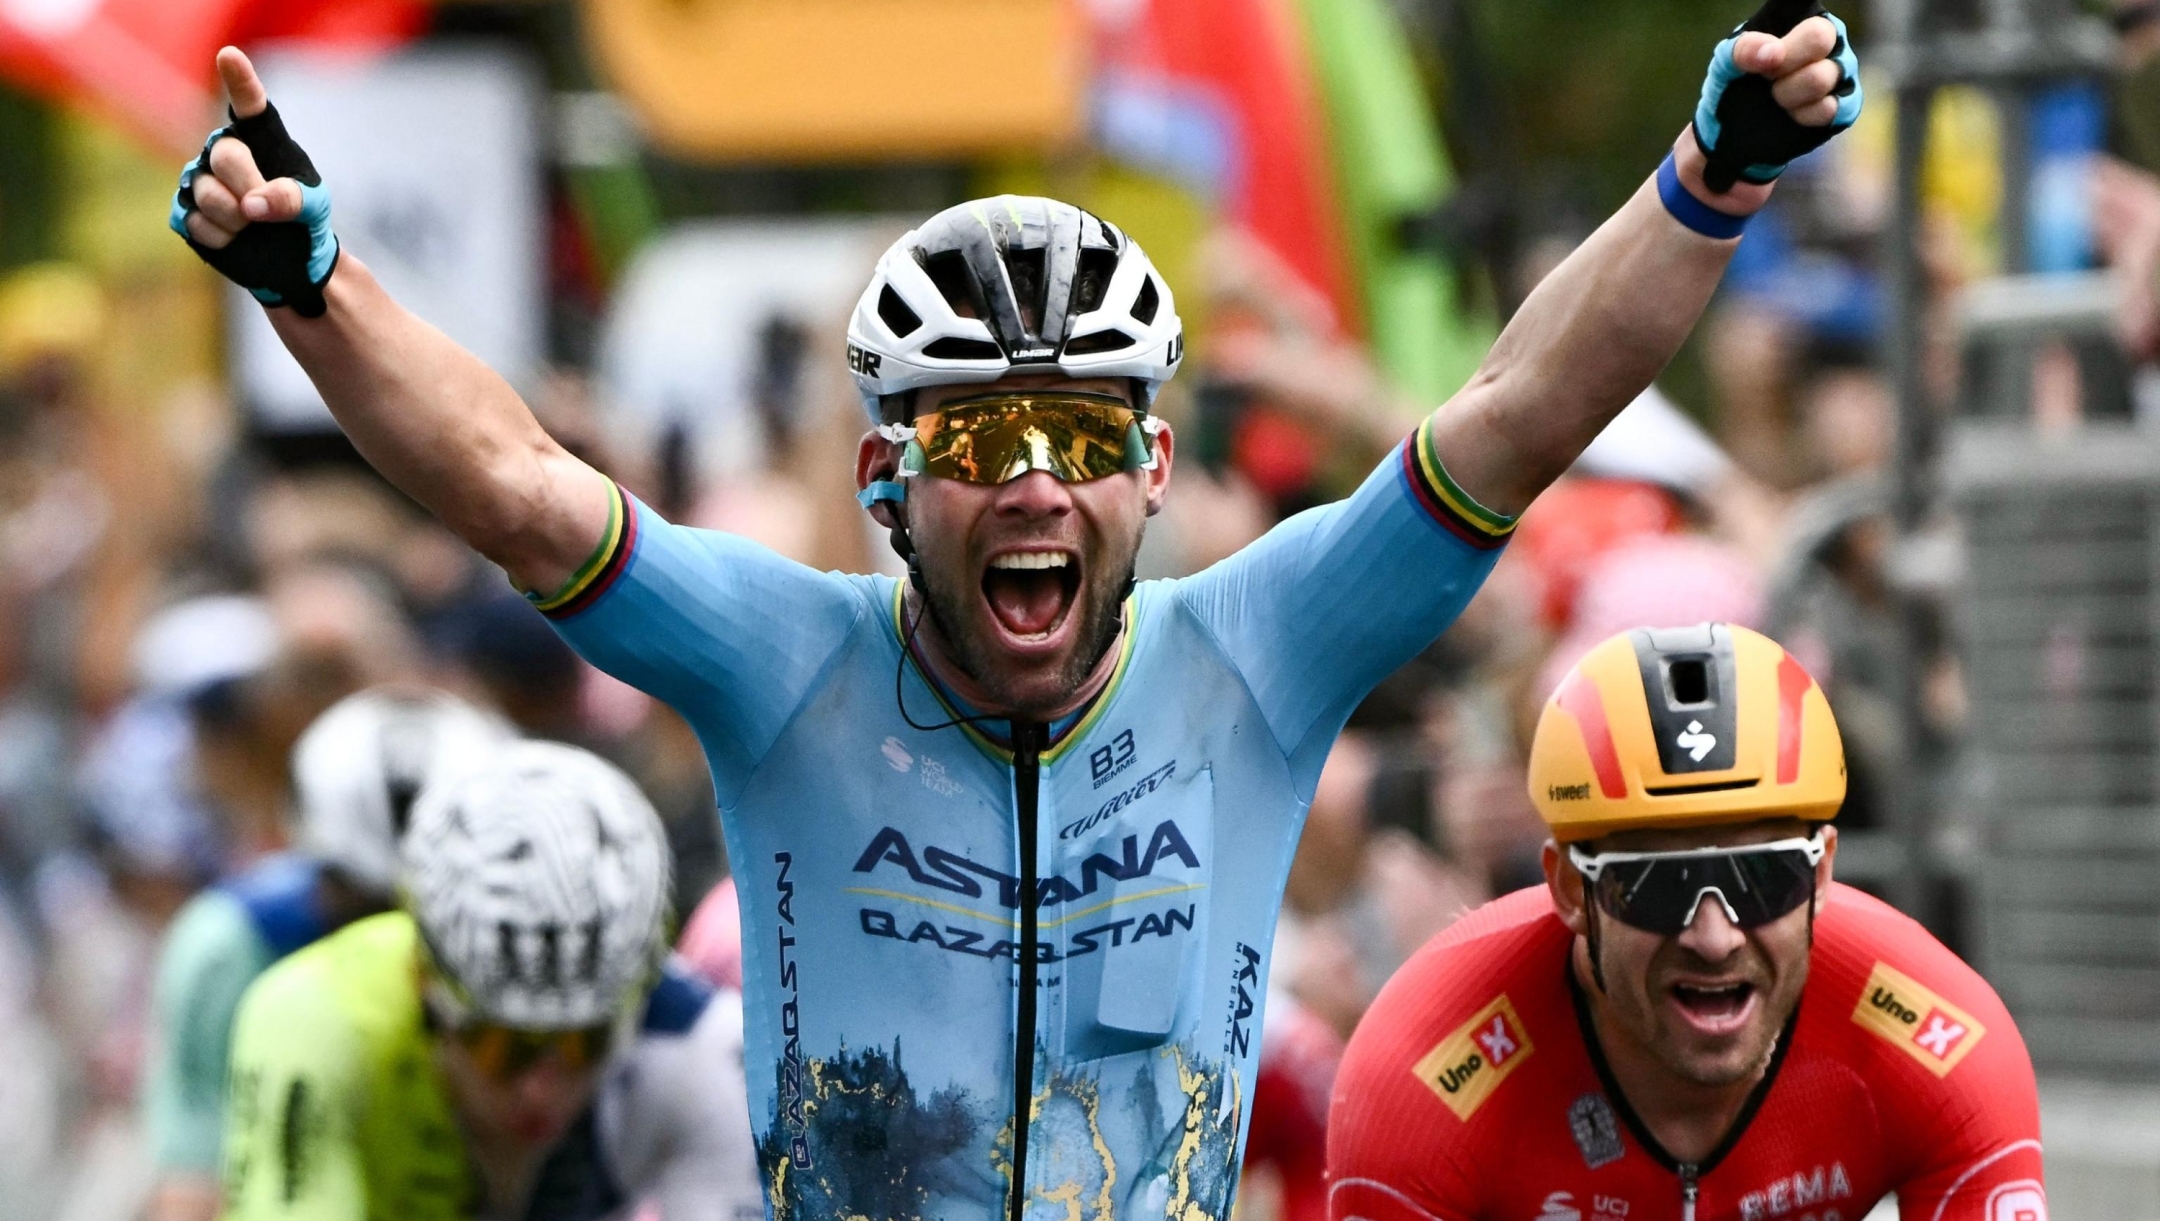 TOPSHOT - Astana Qazaqstan Team's British rider Mark Cavendish (C) cycles past the finish line ahead of third-placed Uno-X Mobility team's Norwegian rider Alexander Kristoff (R) to win the 5th stage of the 111th edition of the Tour de France cycling race, 177,5 km between Saint-Jean-de-Maurienne and Saint-Vulbas, his 35th Tour de France stage victory beating the previous record held by Belgian rider Eddy Merckx, on July 3, 2024. (Photo by Marco BERTORELLO / AFP)